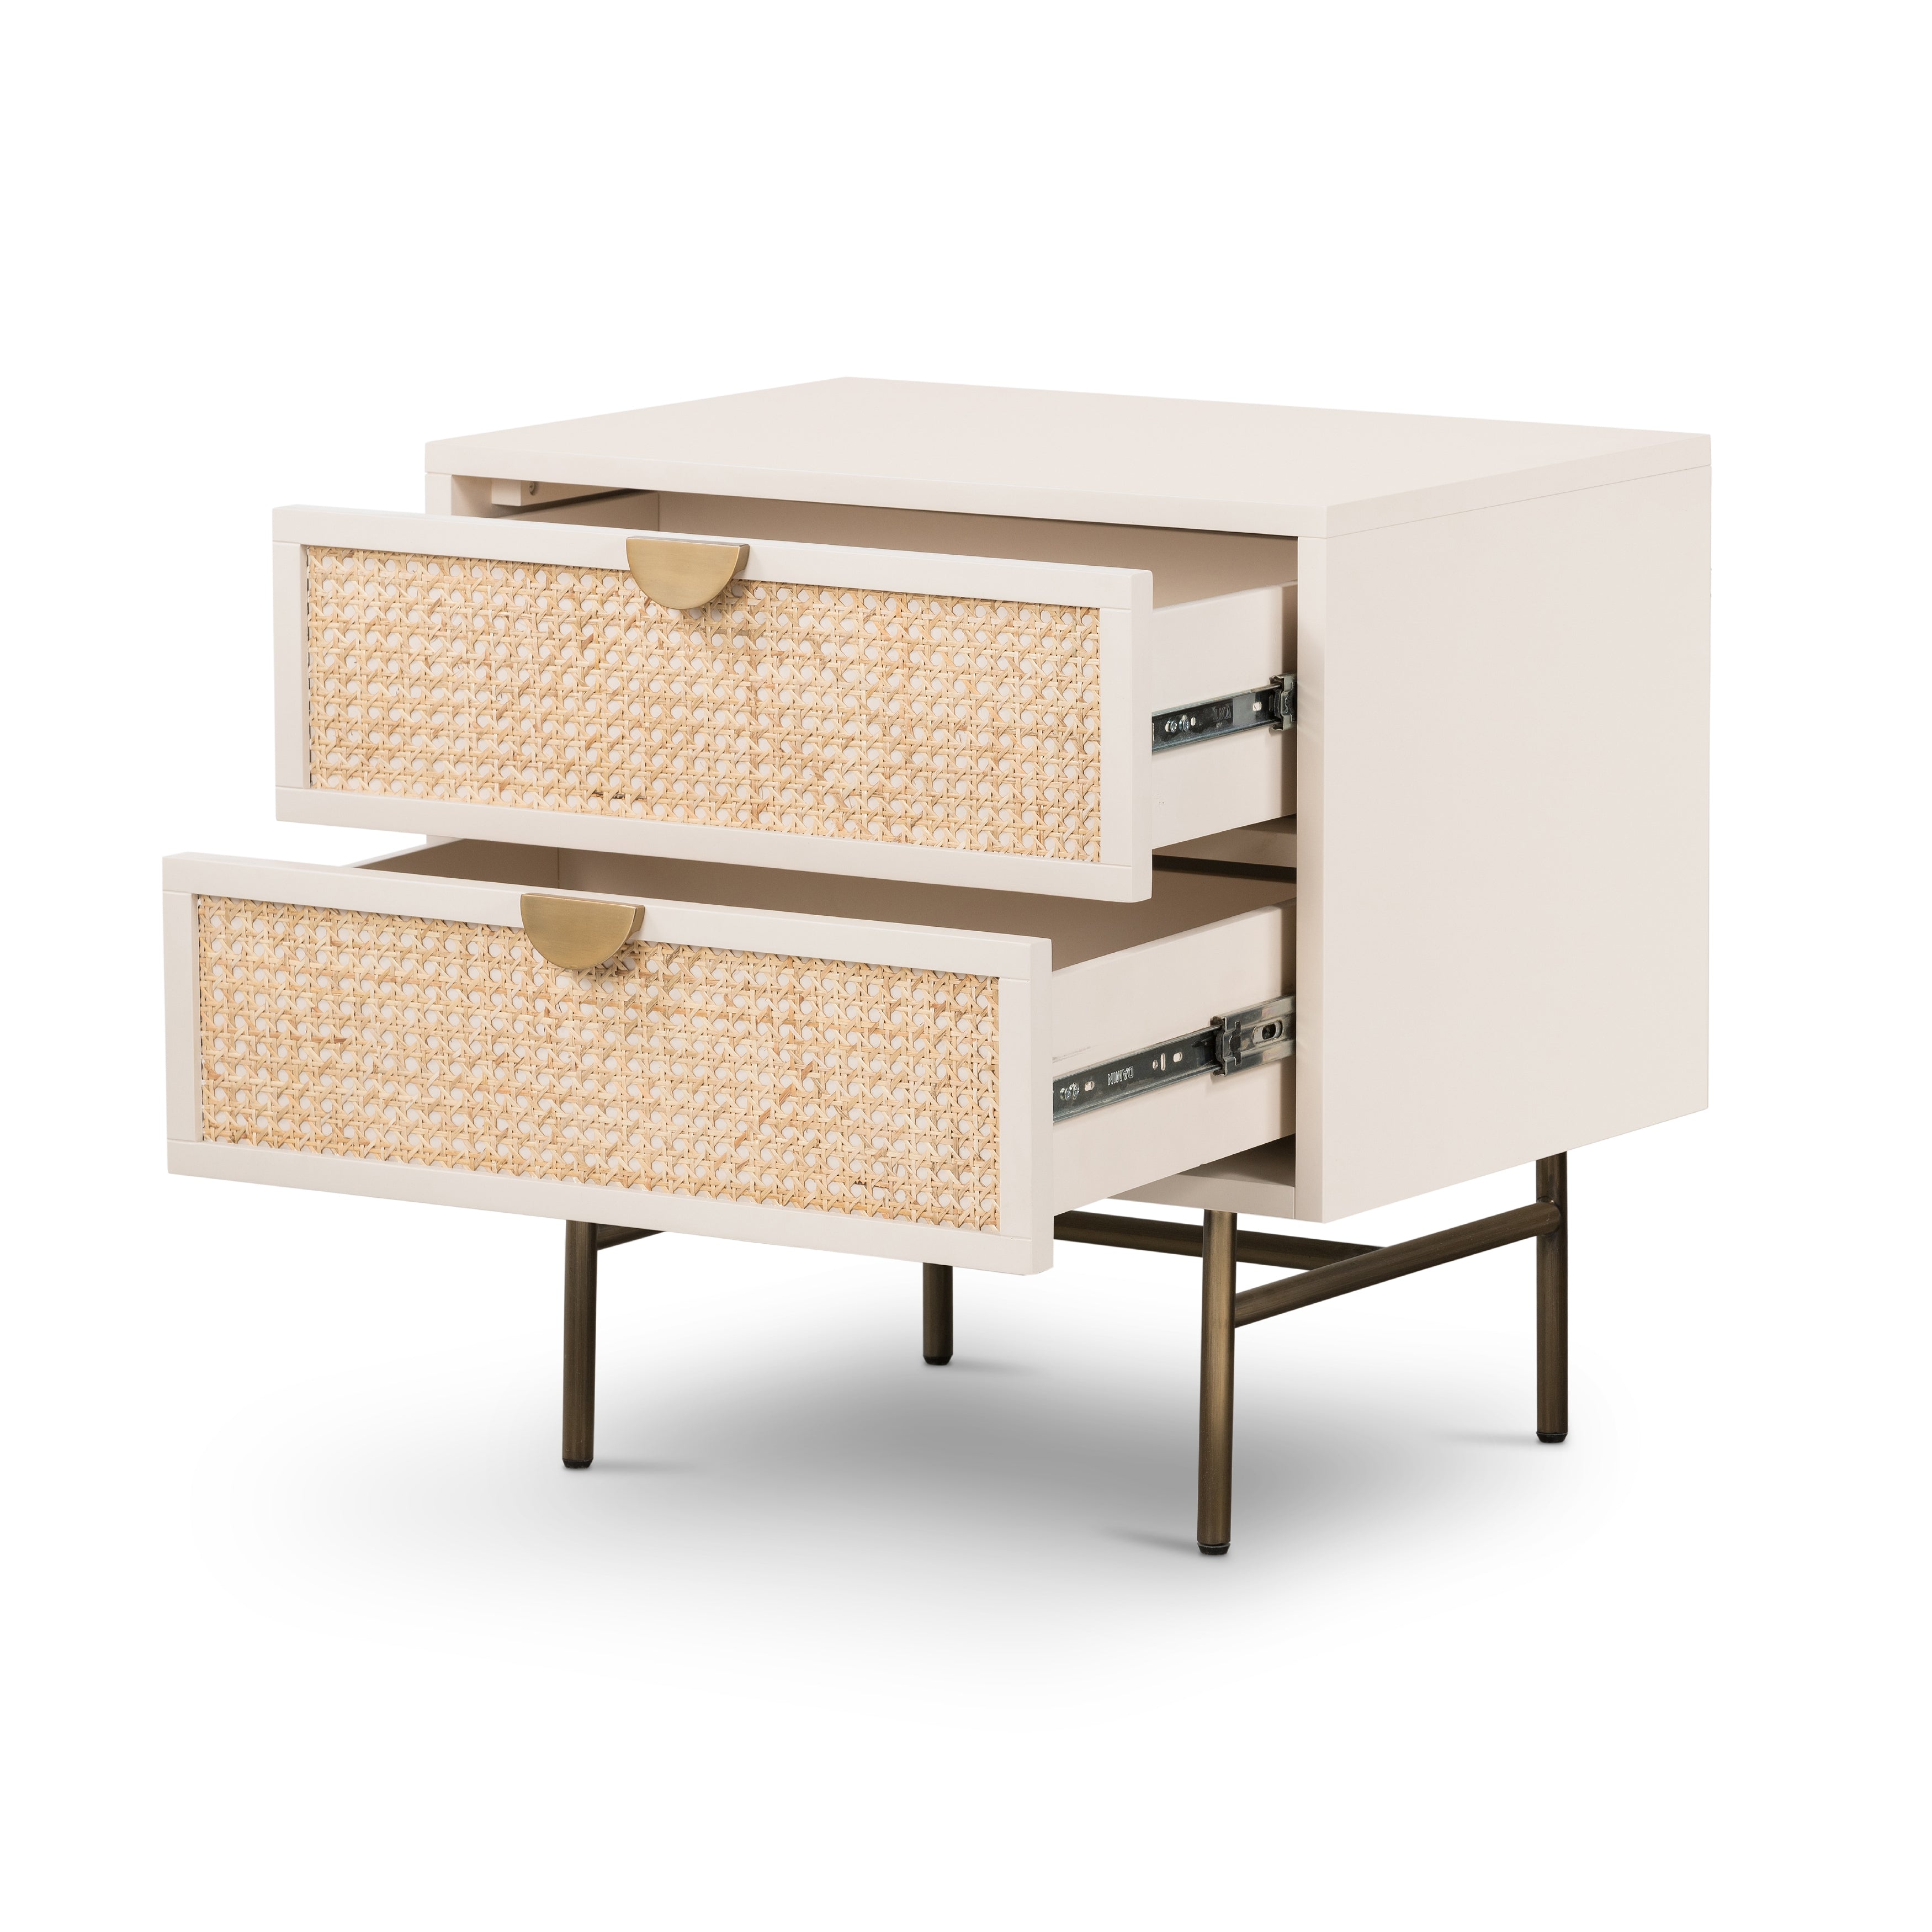 Bring a light look to bedroom styling with this Luella Nightstand - Matte Alabaster. The two-drawer nightstand features woven cane panels and half-moon hardware finished in an aged brass.  Overall Dimensions: 24.00"w x 18.00"d x 24.00"h